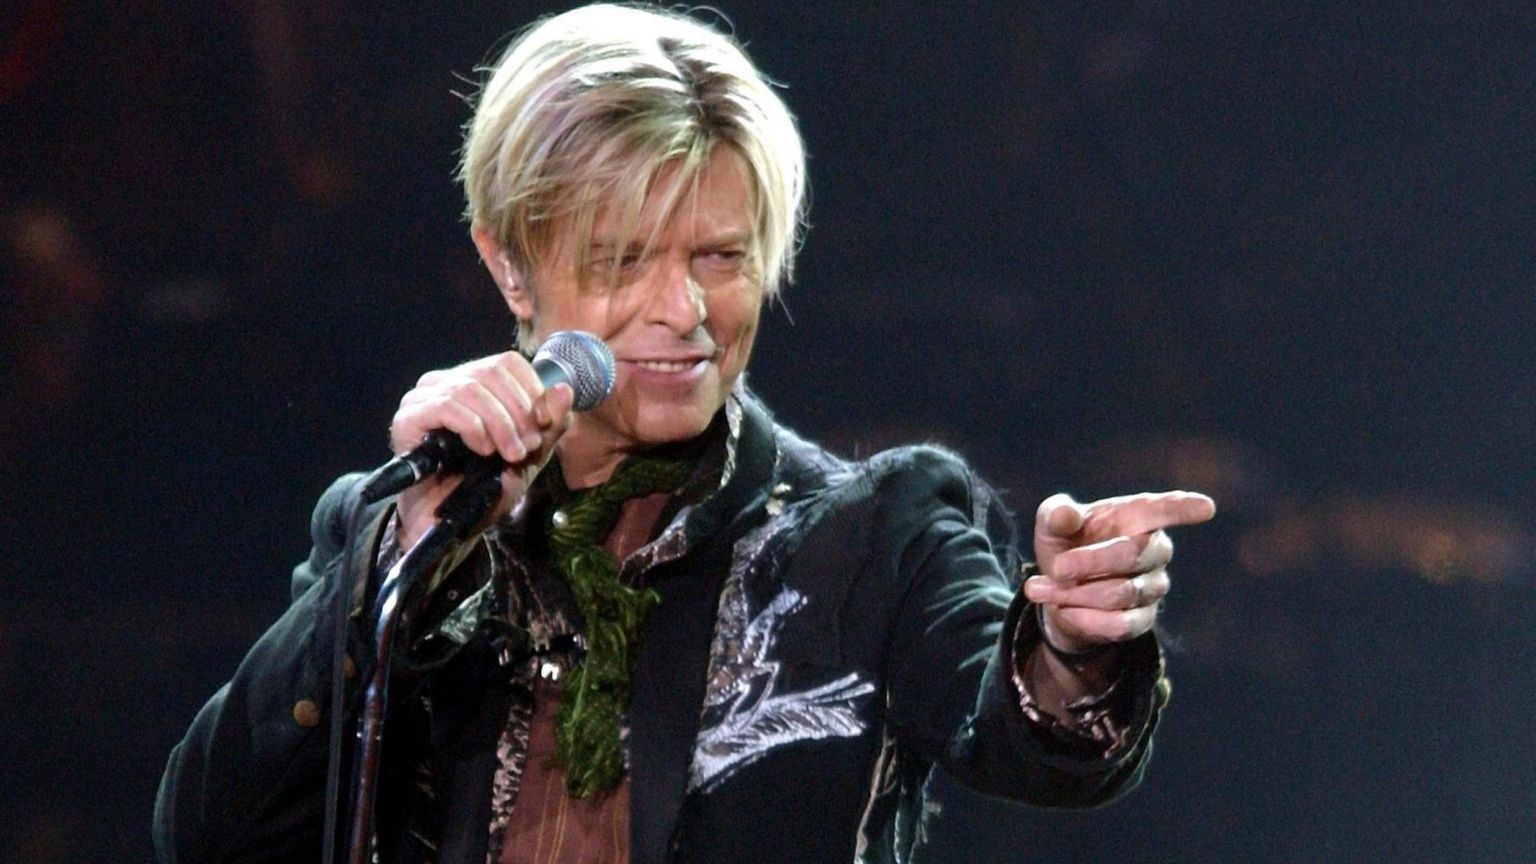 A file photograph showing British rock legend David Bowie perfoming on stage during his concert in Hamburg, Germany, 16 October 2003